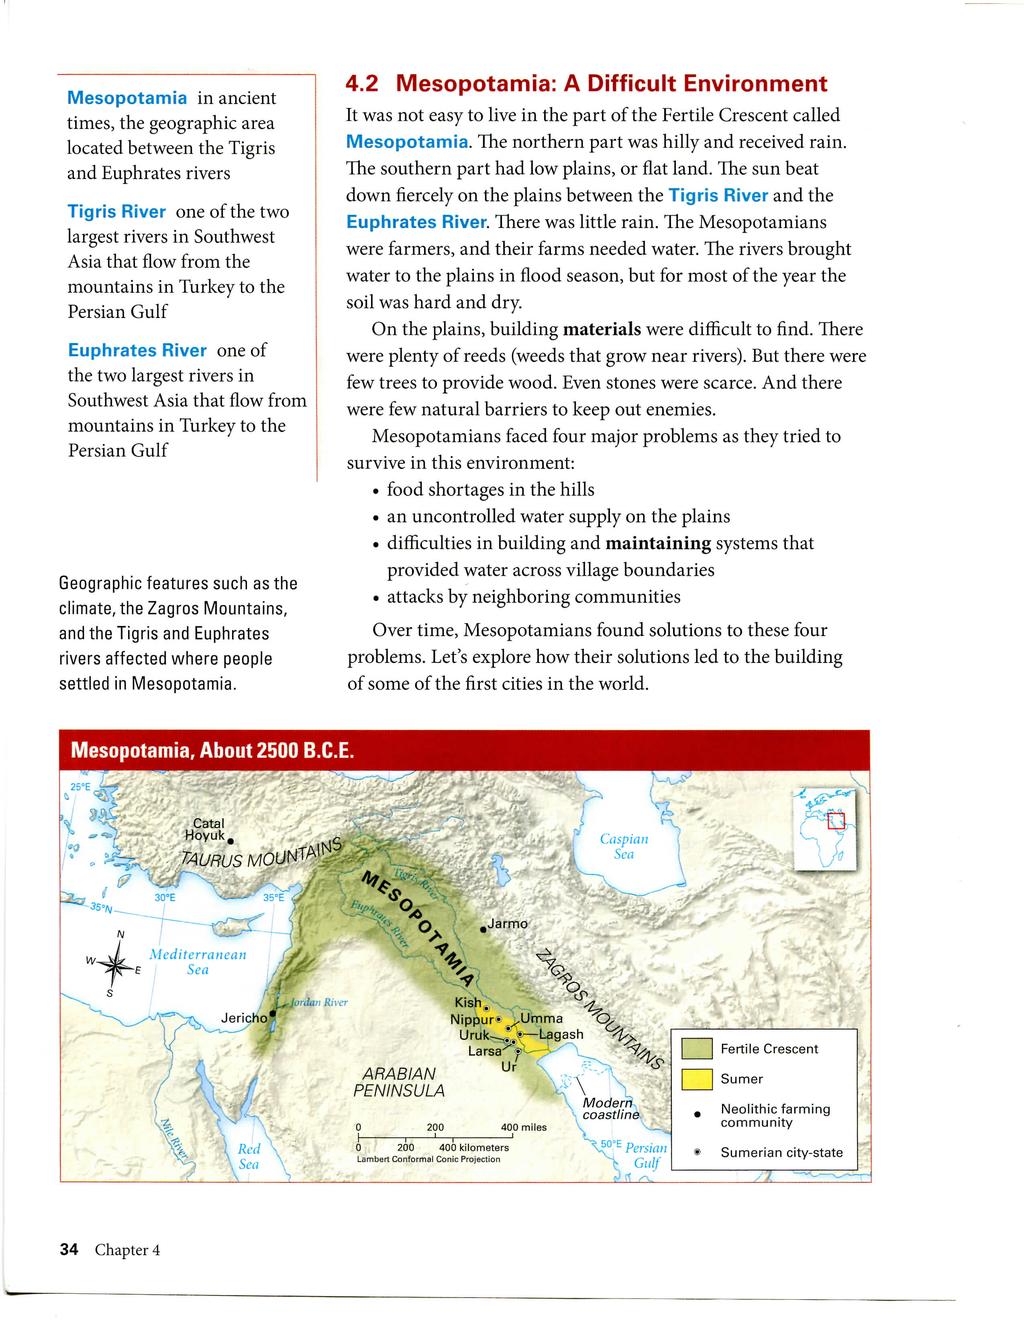 Mesopotamia in ancient times, the geographic area located between the Tigris and Euphrates rivers Tigris River one of the two largest rivers in Southwest Asia that flow from the mountains in Turkey